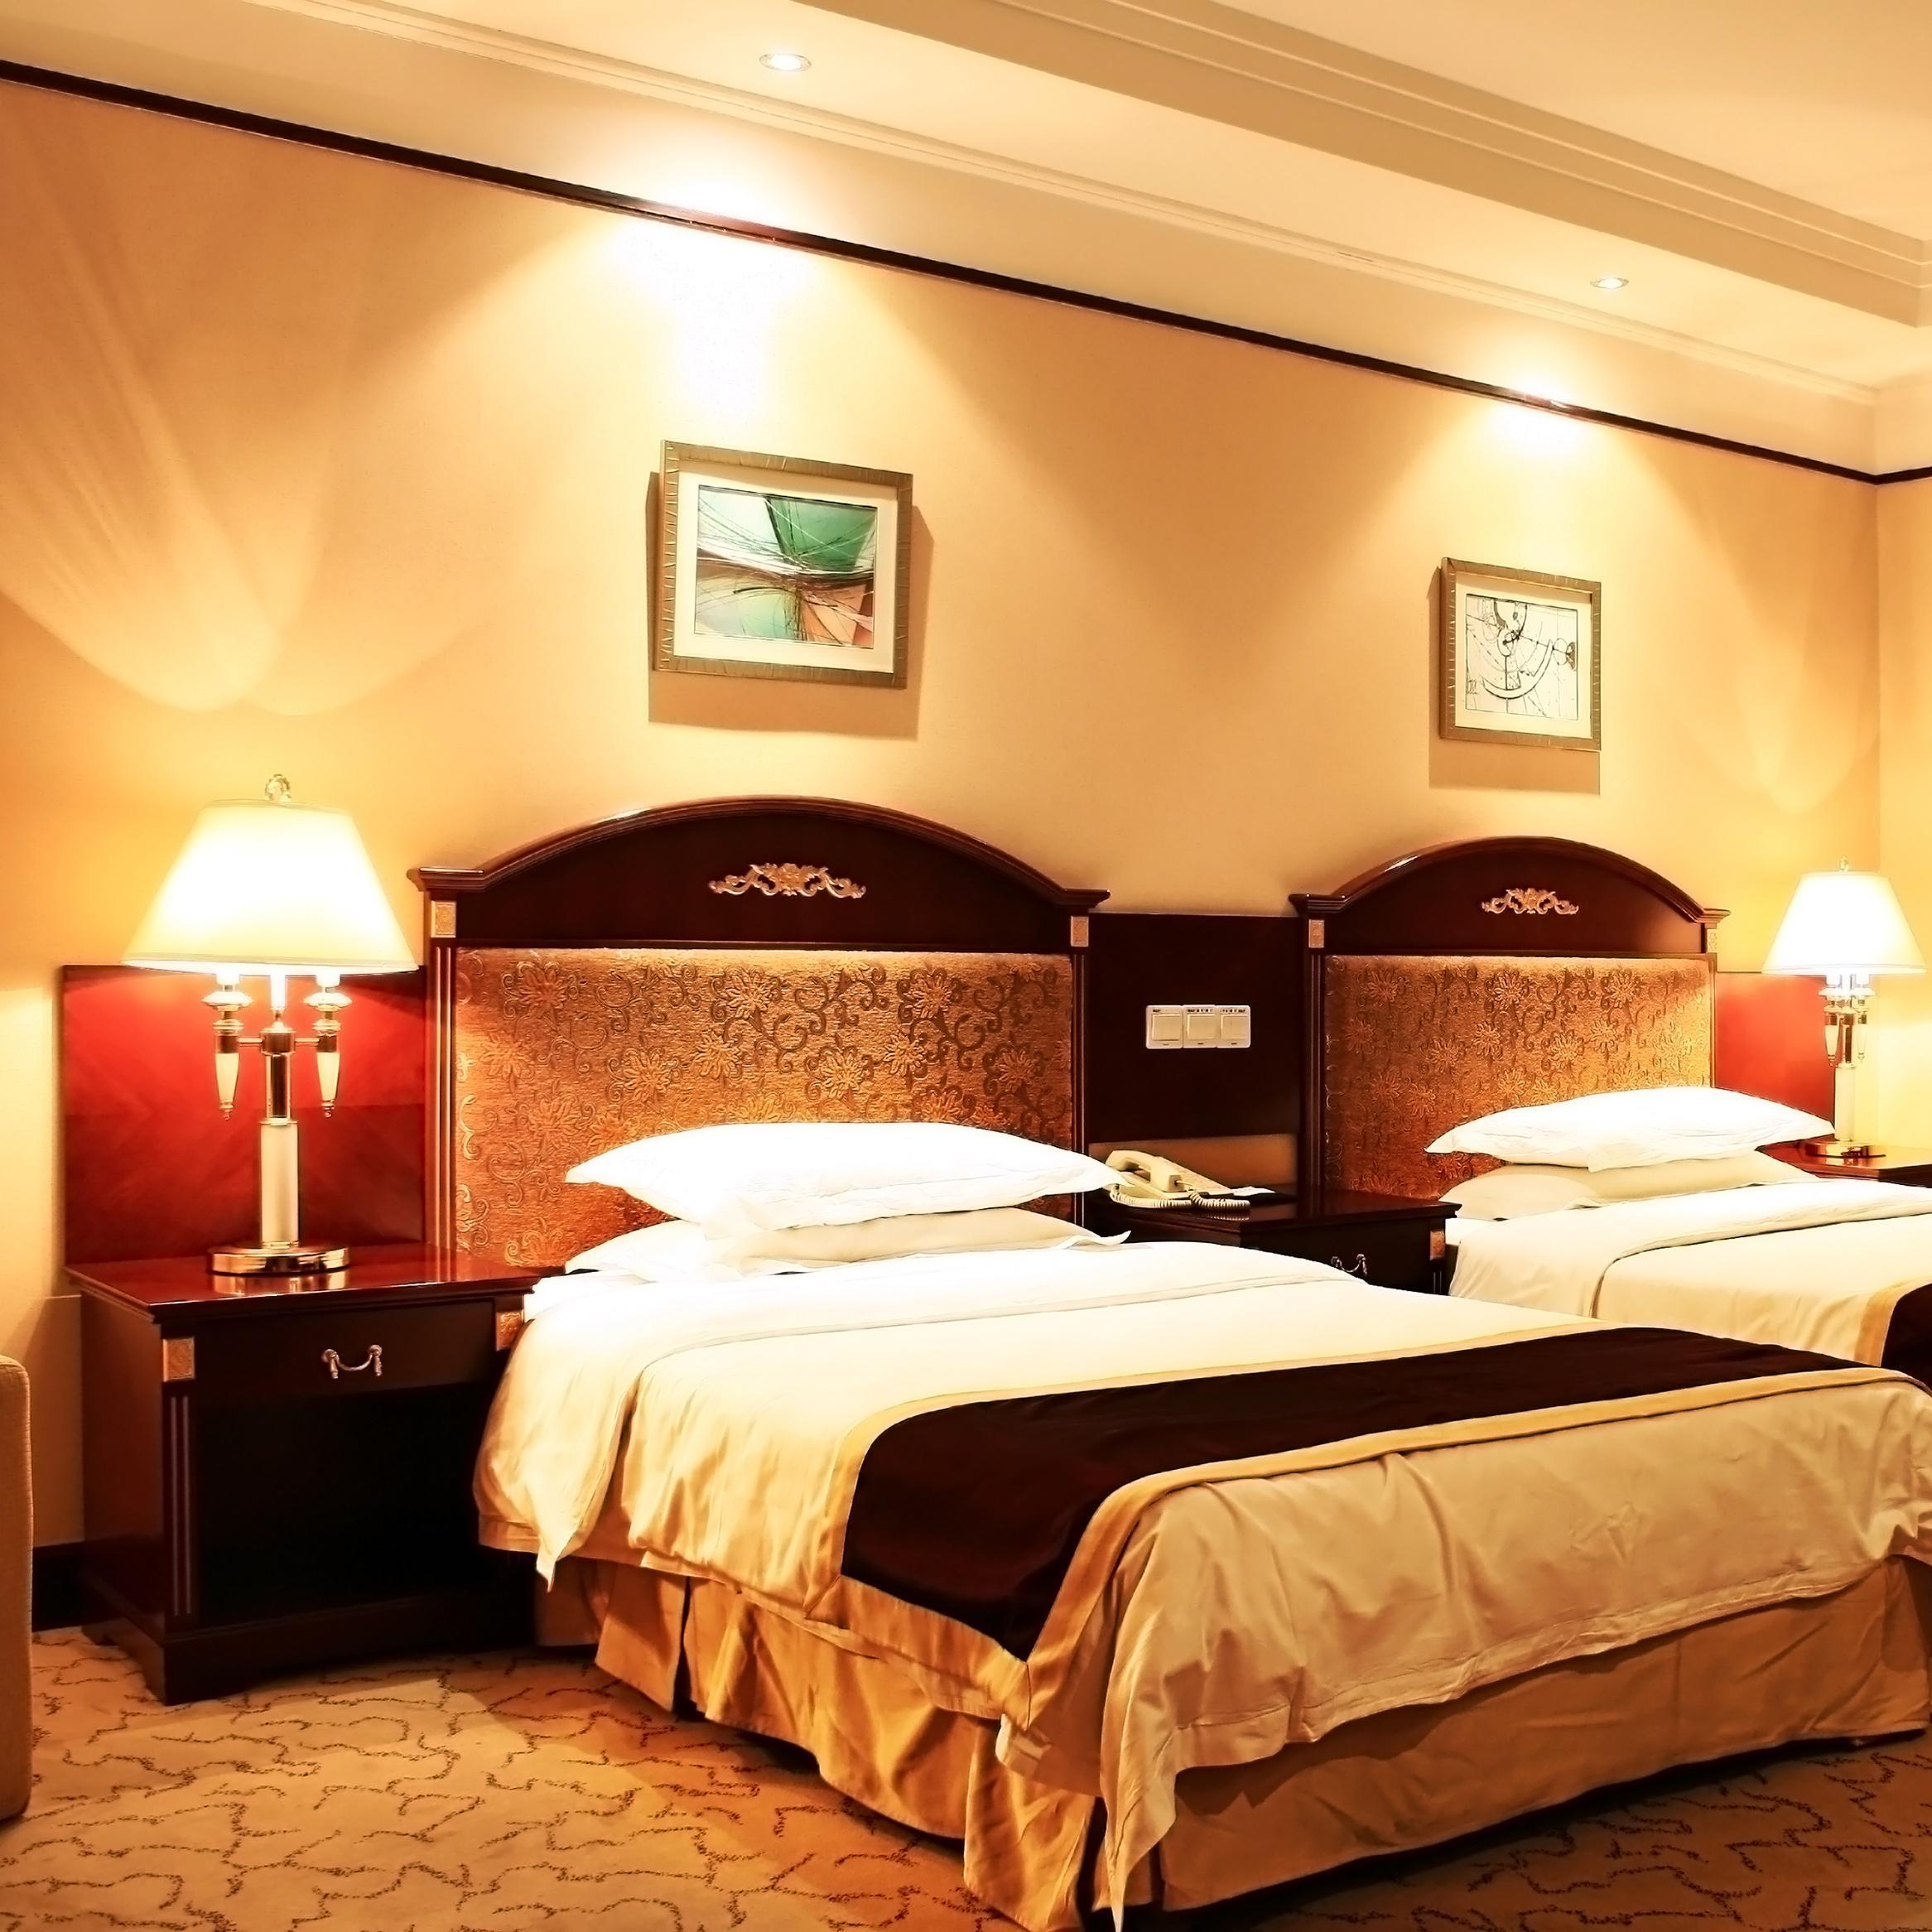 Kidderminster Hotels guide to hotelrooms in town.